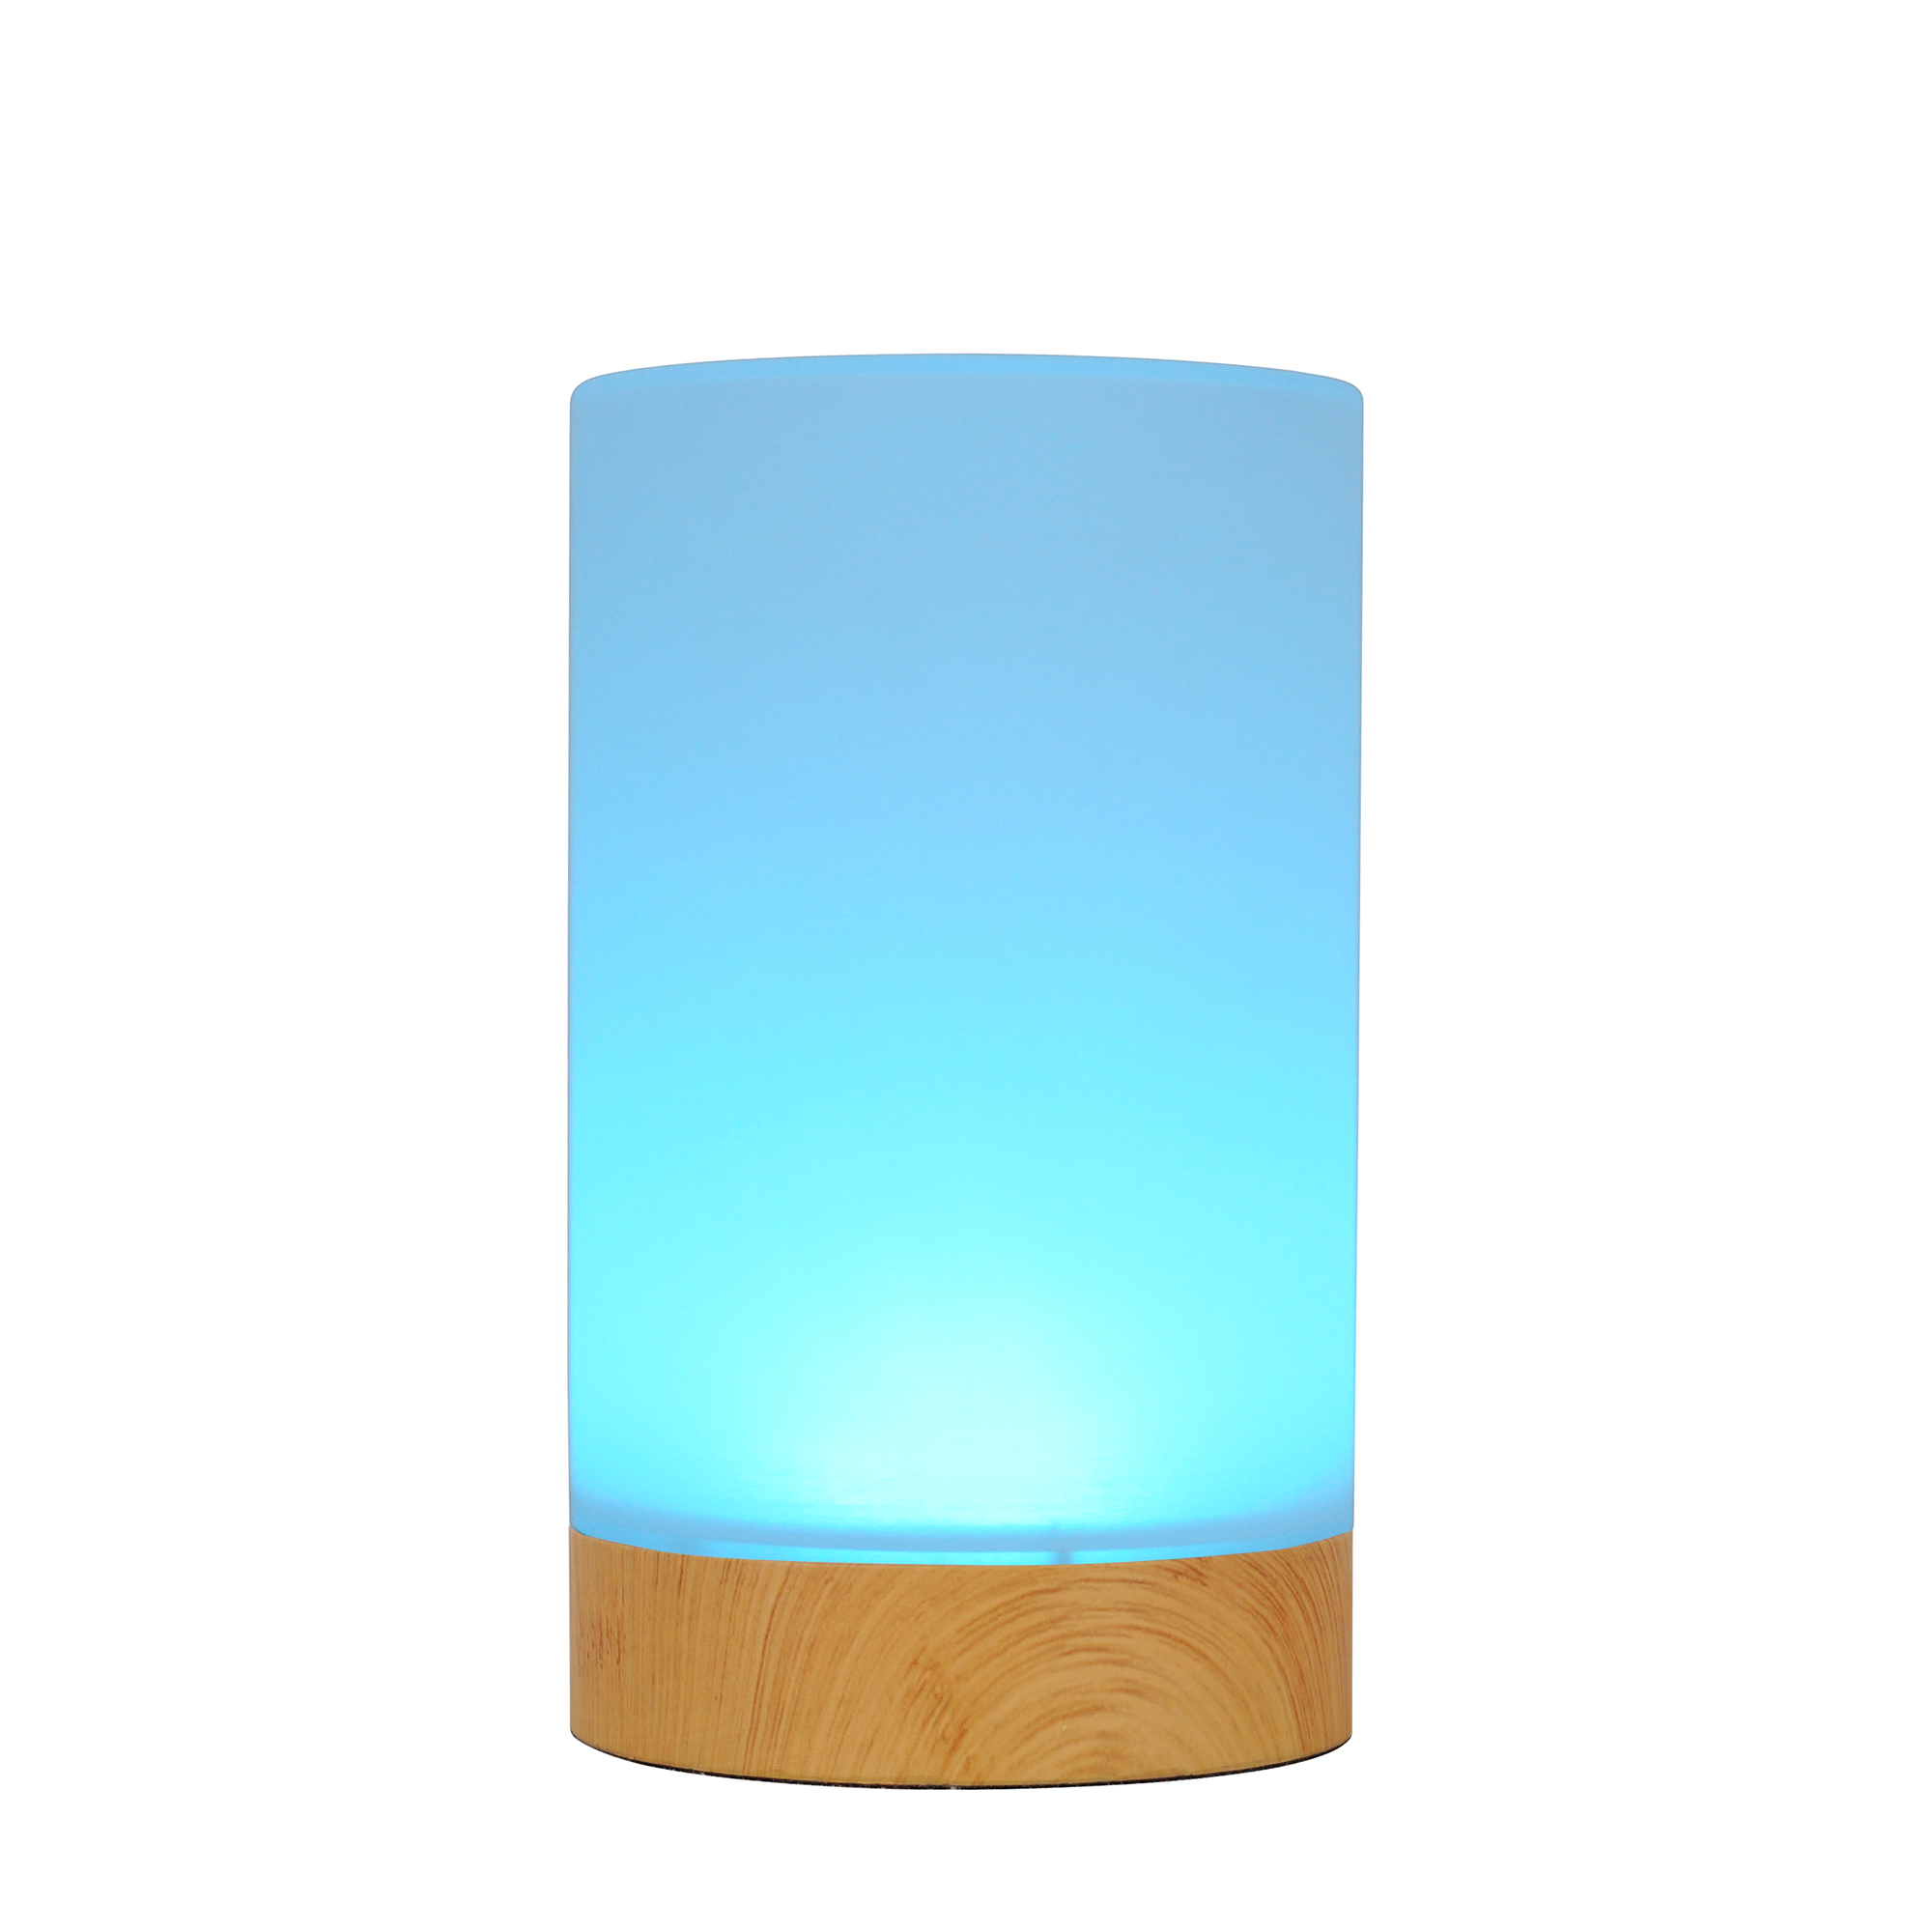 NBG Friendship LED Color Changing Table Lamp with AC Cord, Touch Control Wifi Synchronize Light Set - image 3 of 15